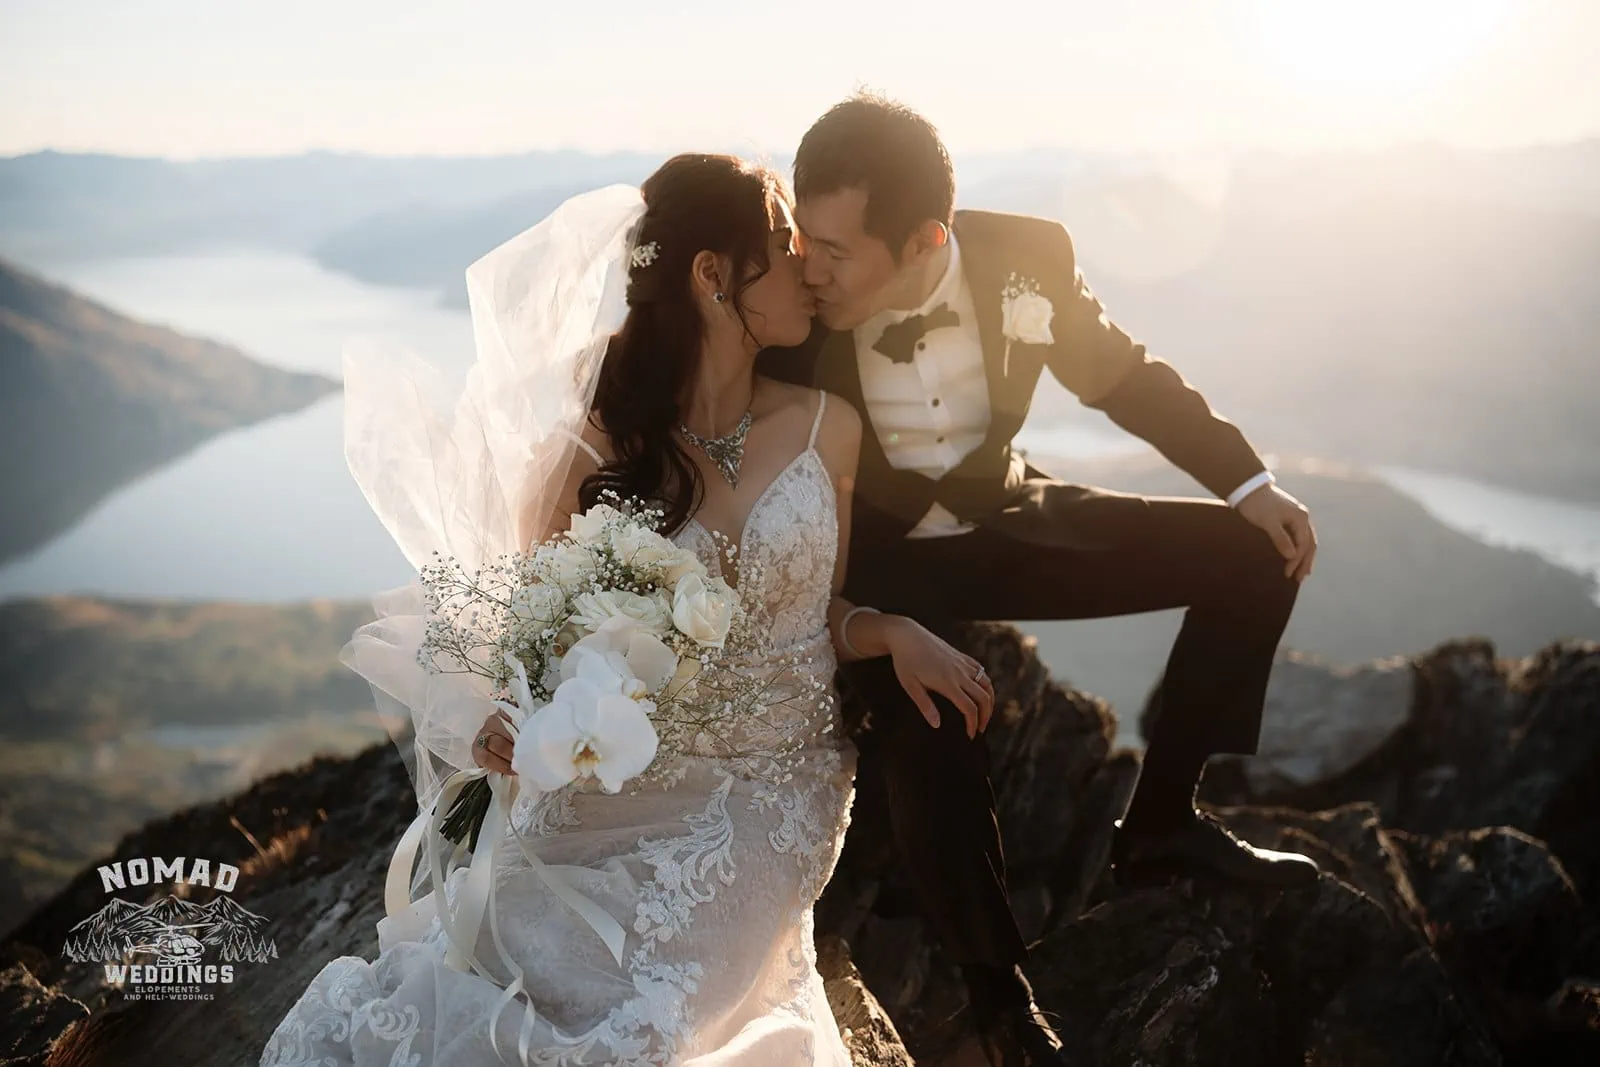 Connie and Andrew share a romantic kiss during their pre-wedding shoot atop The Remarkables mountain at sunset.